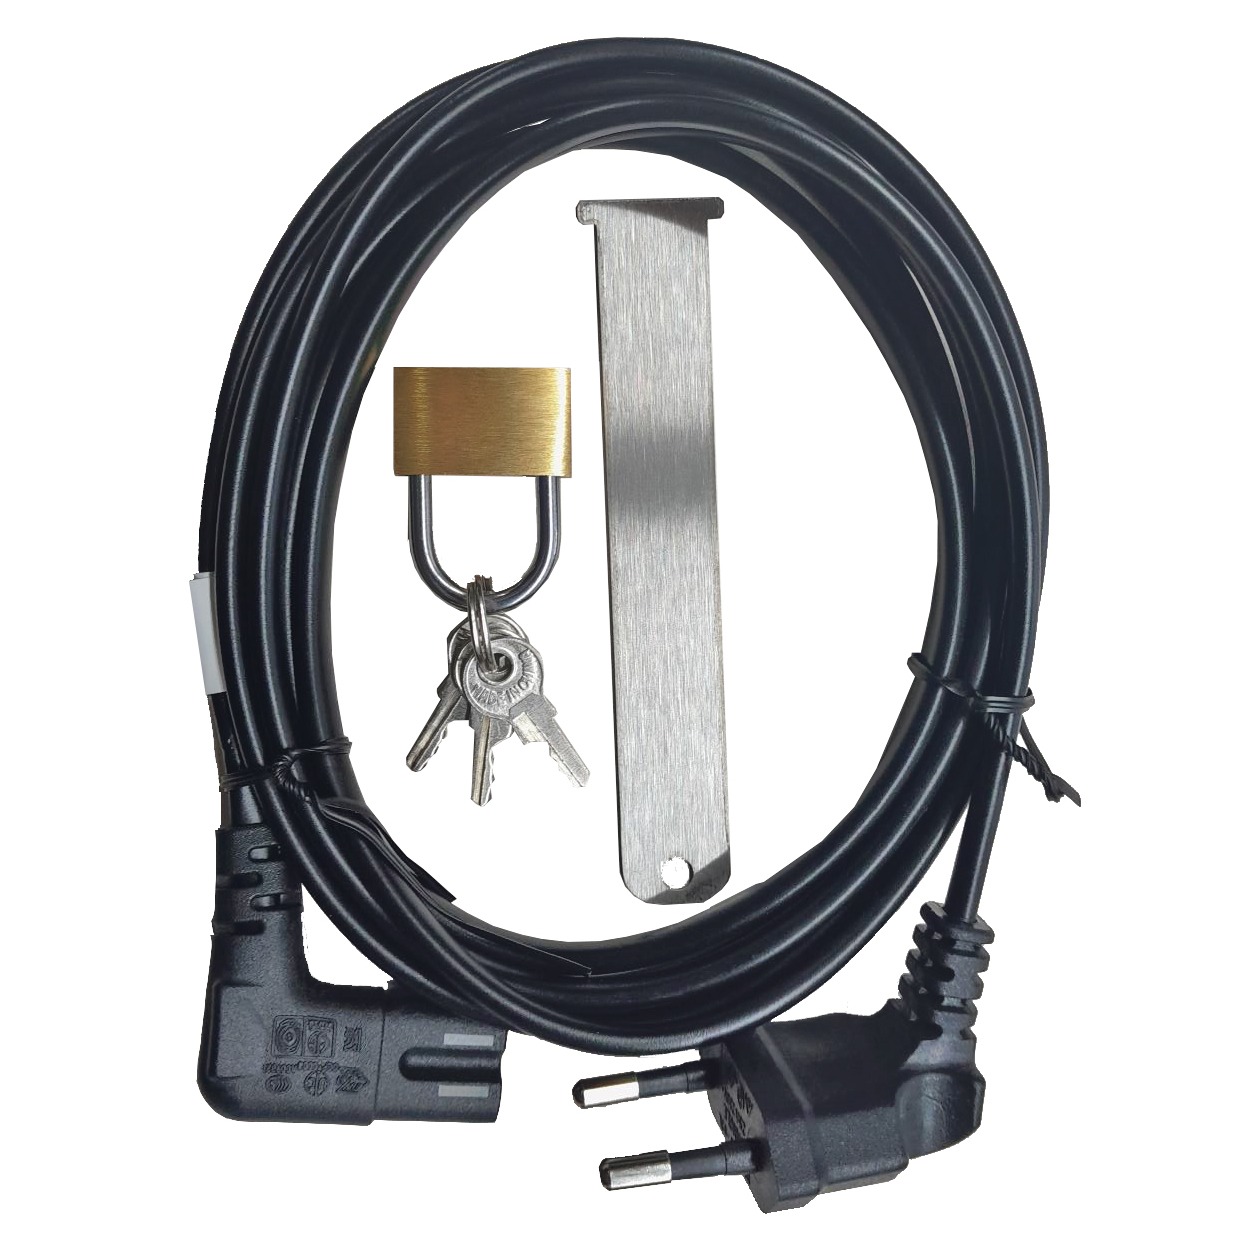 Productfoto van ONgineer LiON Lock for Wall Mount - Set incl. Charging Cable